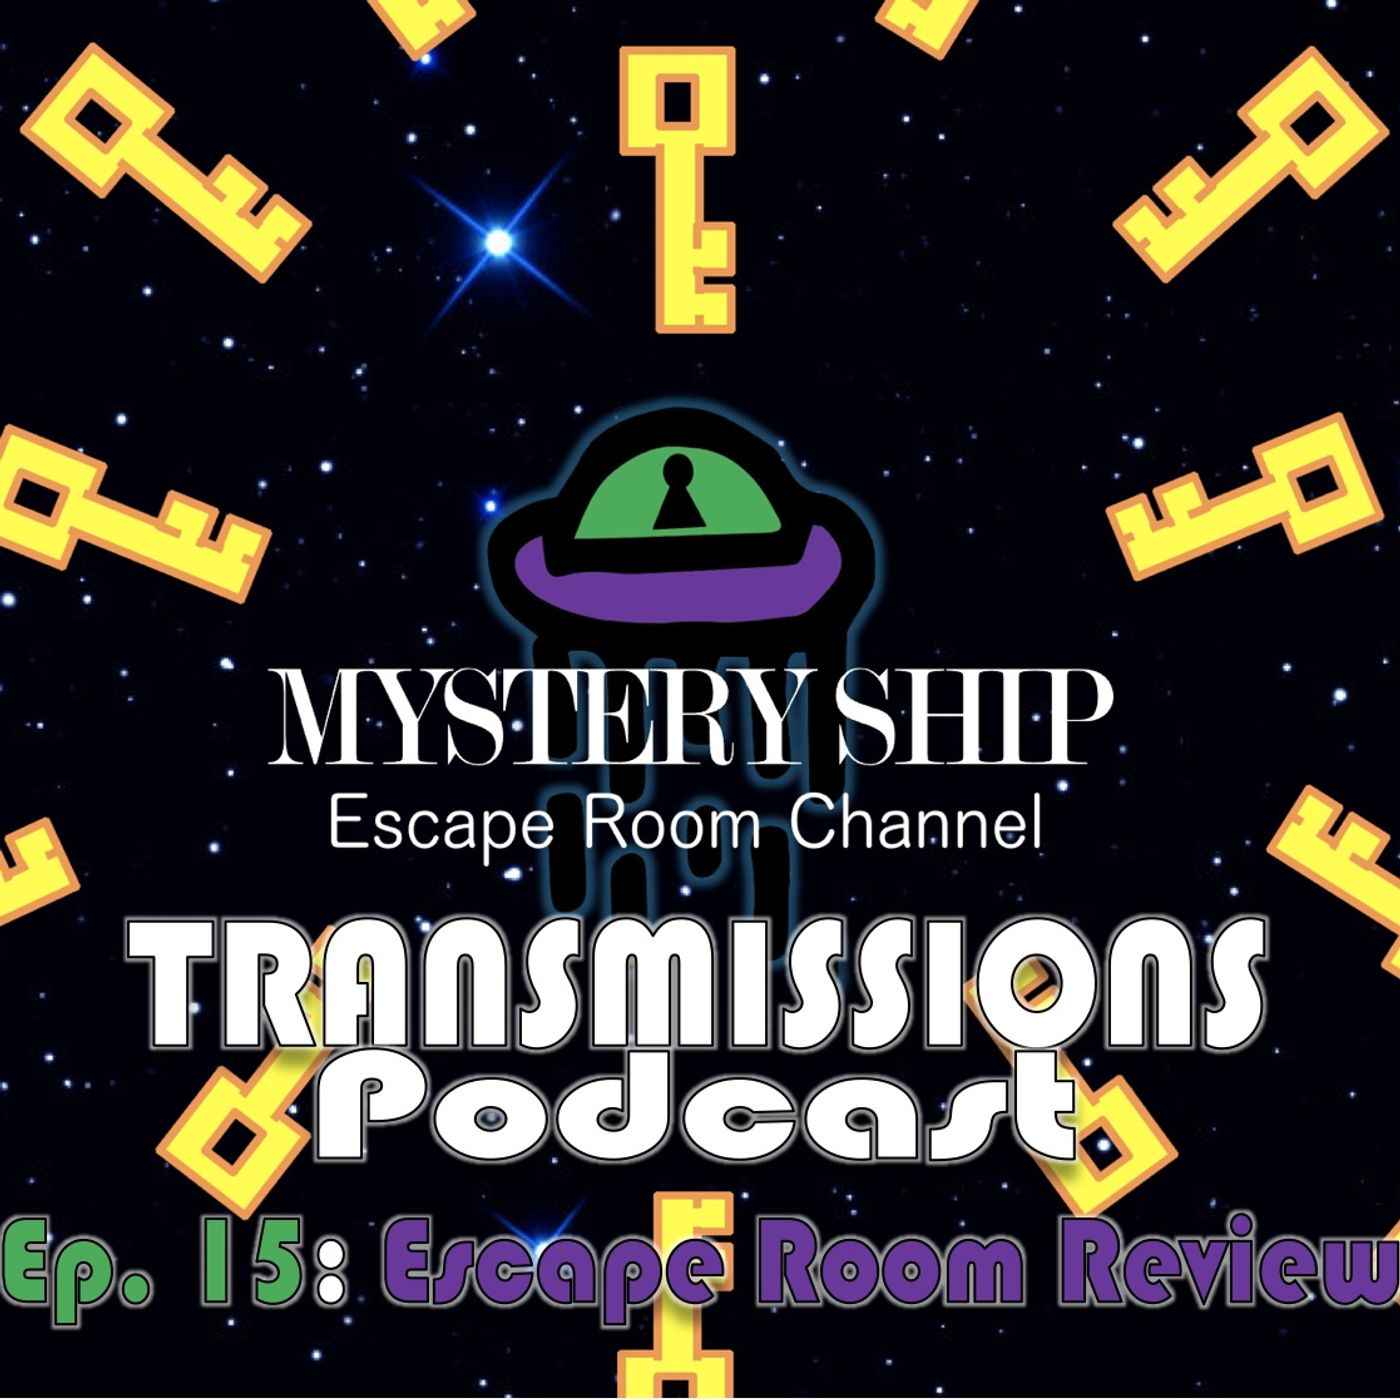 Ep15 Escape Room Review: Grandma’s Master Plan - Mystery Ship Transmissions Podcast